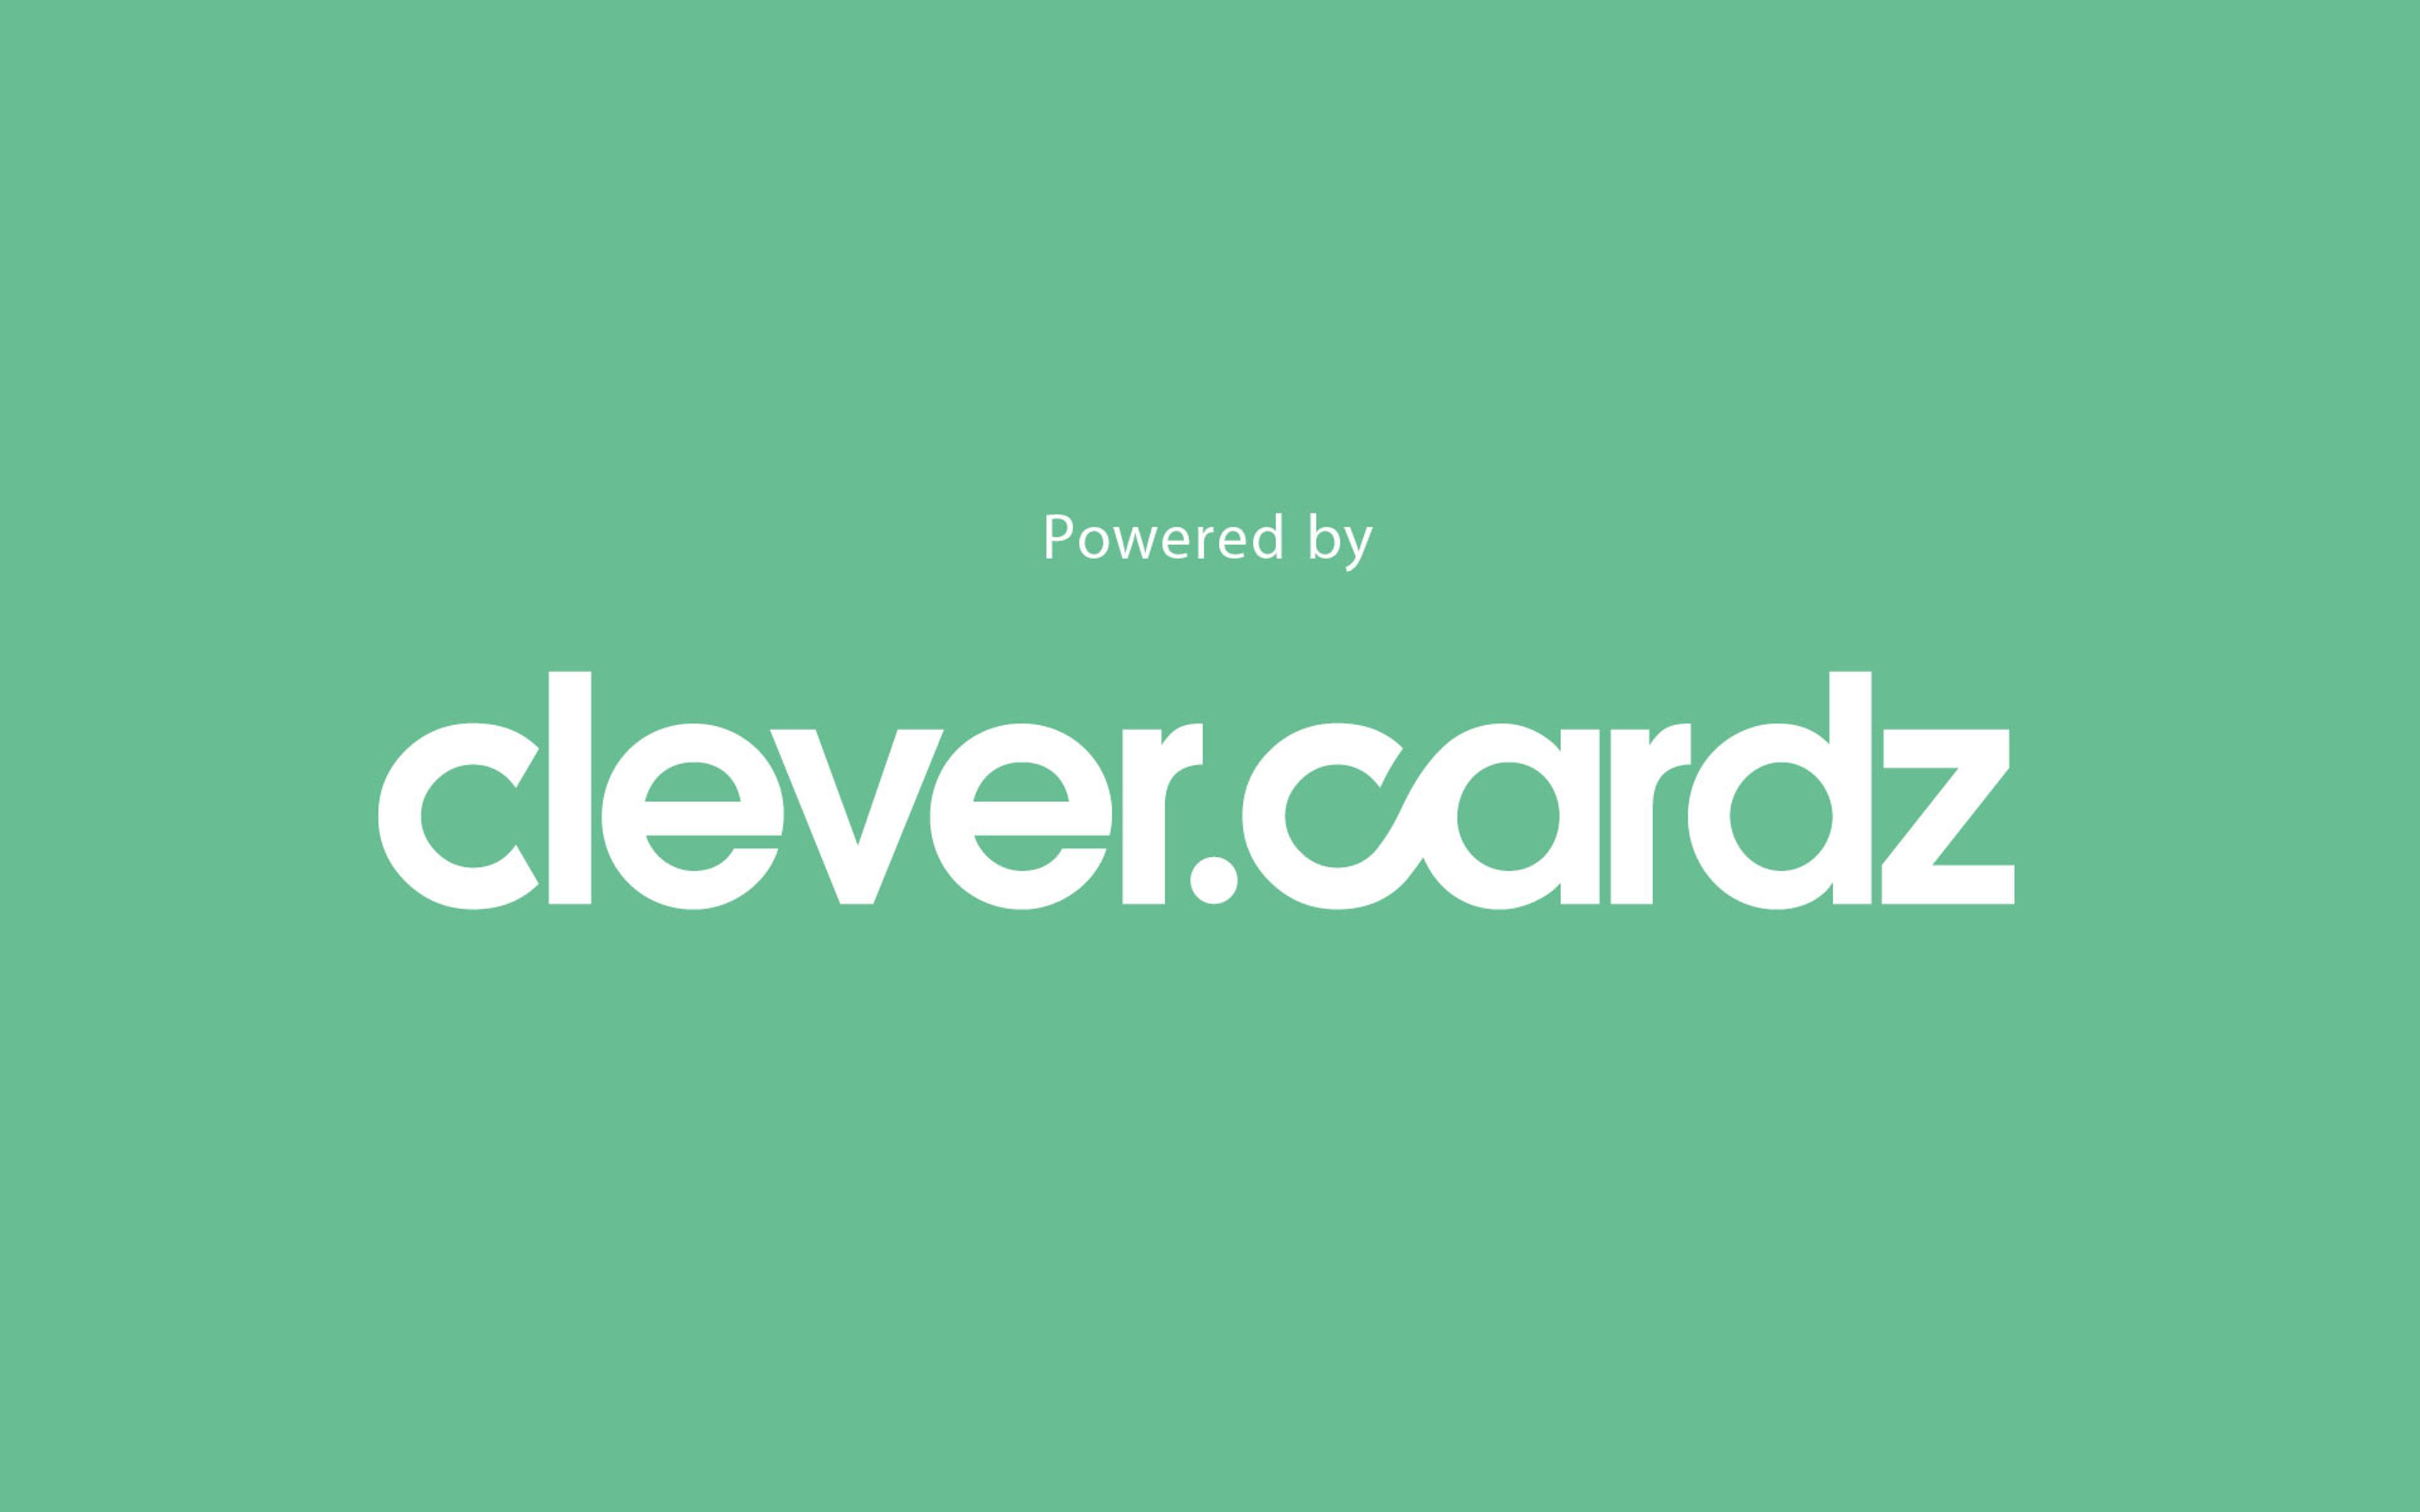 Powered by clevercardz